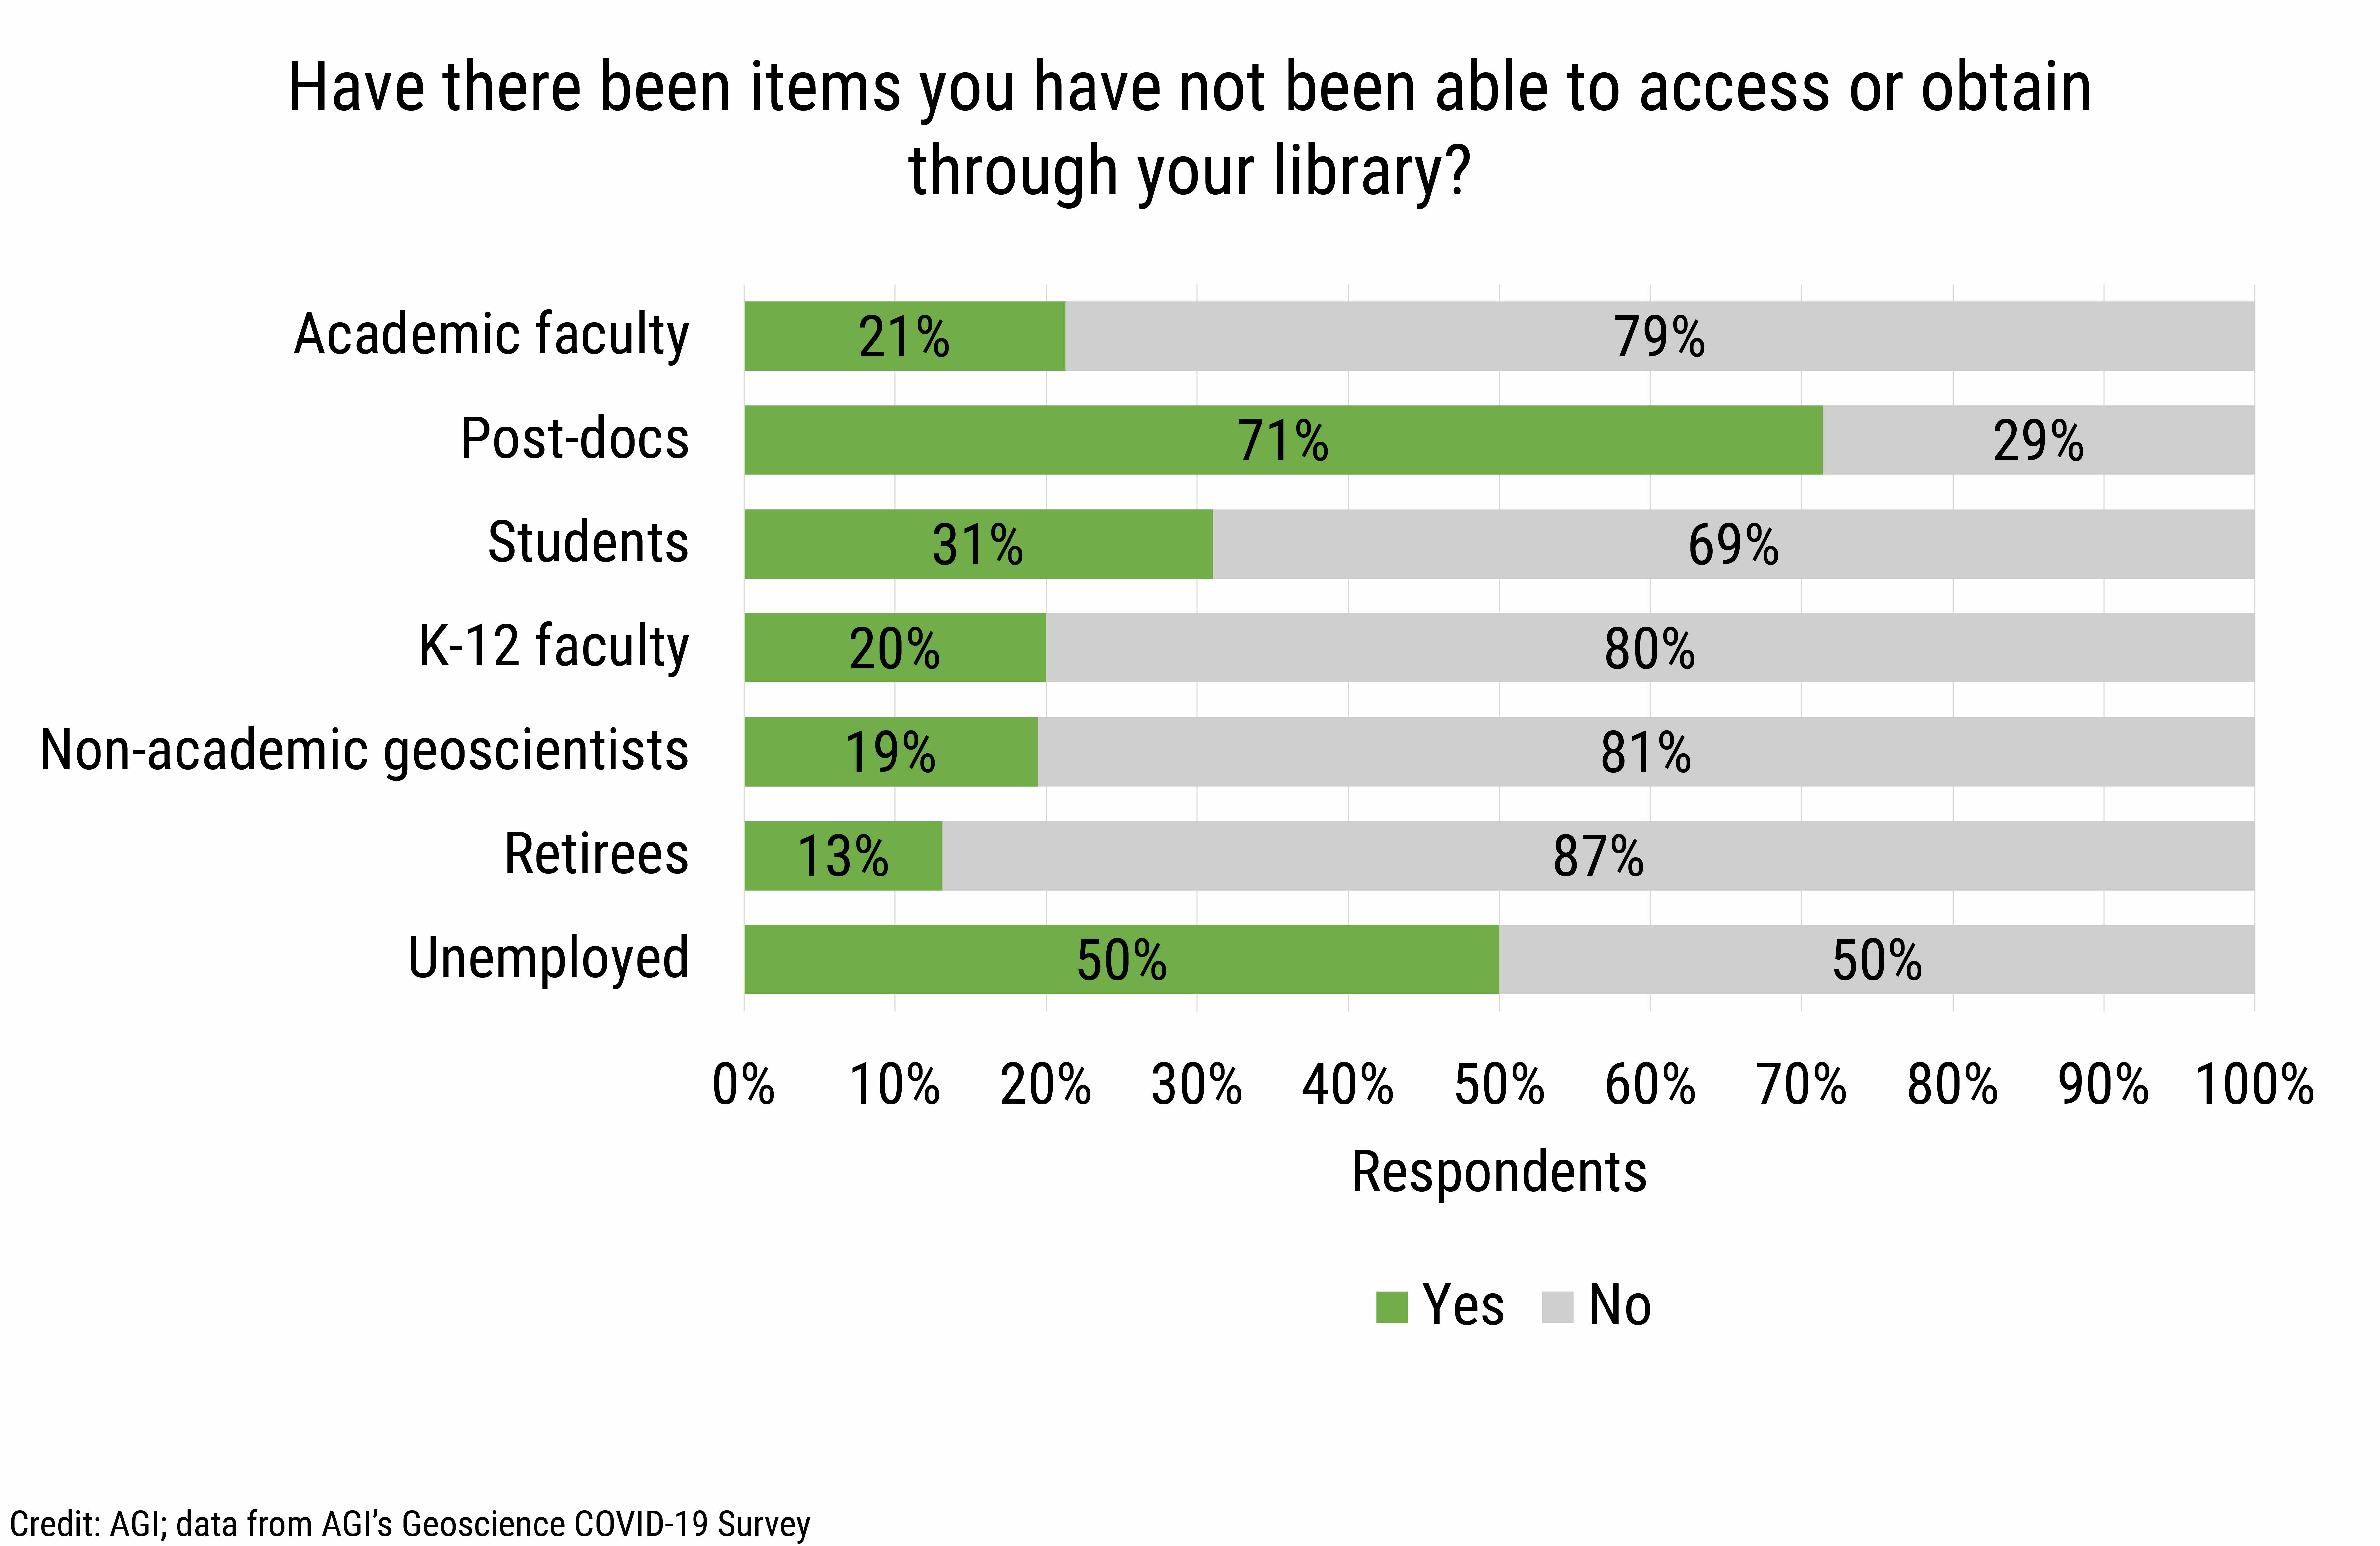 DB_2020-026 chart 07: Lack of access to items through library (Credit: AGI; data from AGI&#039;s Geoscience COVID-19 Survey)